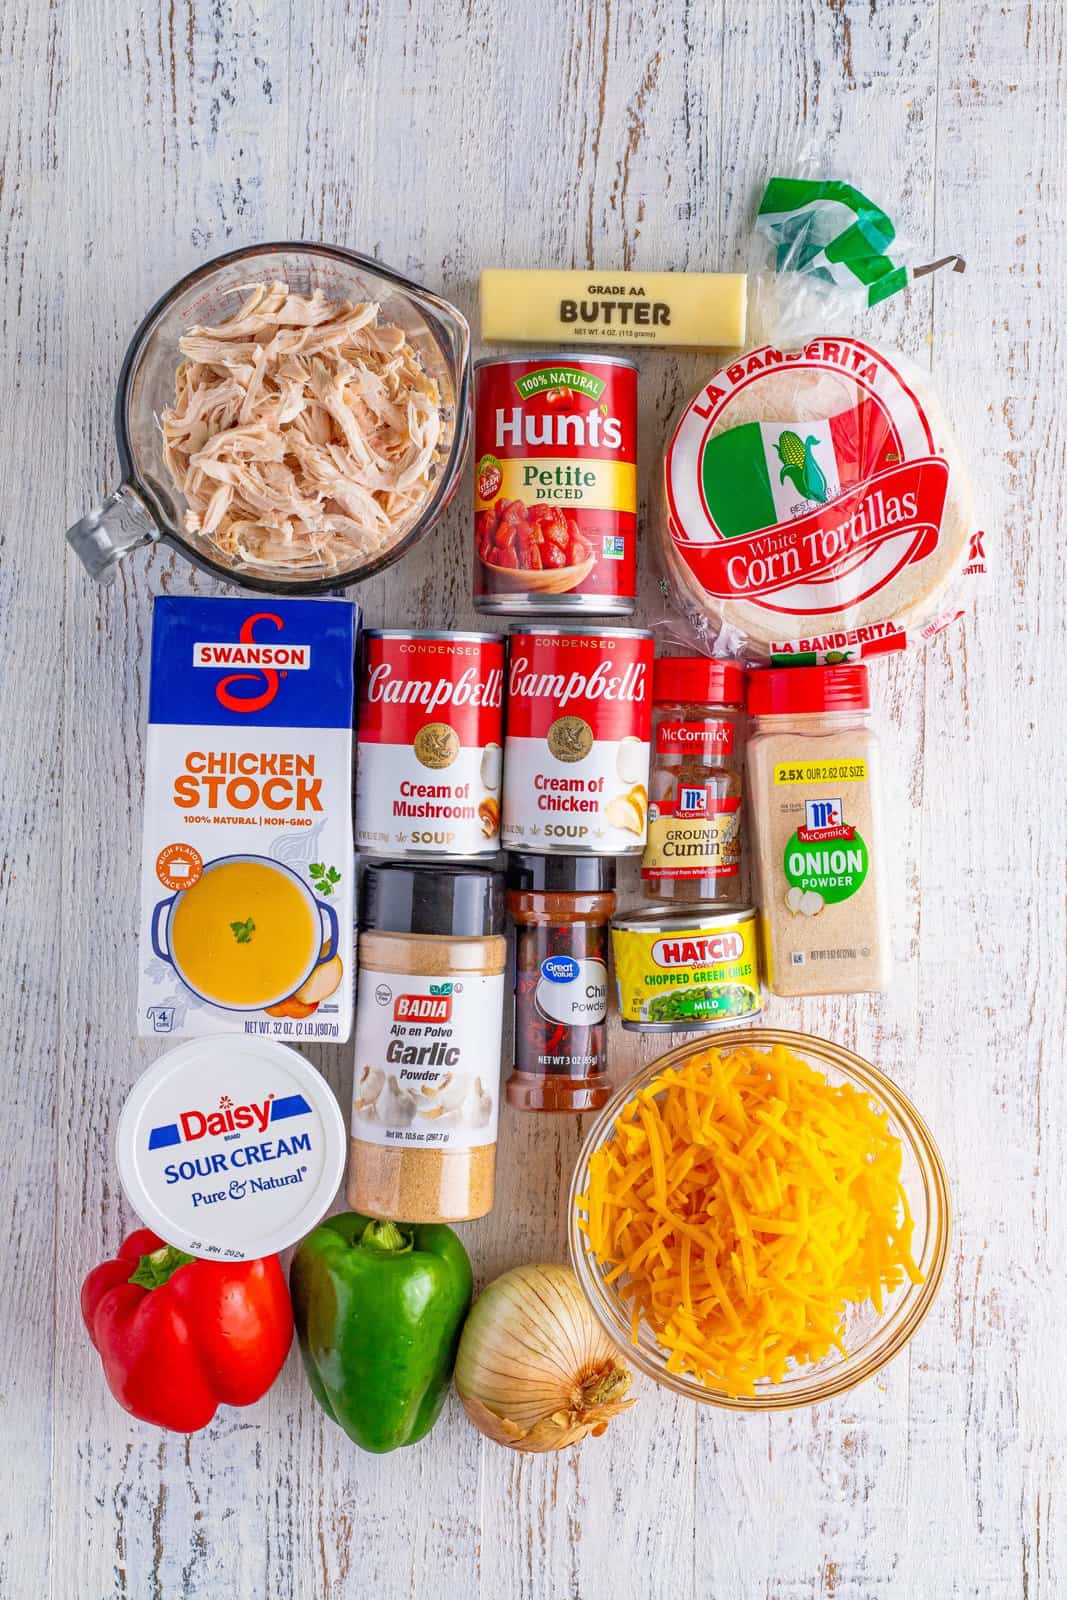 Rotisserie chicken, cream of mushroom soup, cream of chicken soup, petite diced tomatoes, green bell pepper, red bell pepper, cheddar cheese, butter, onion, chopped green chiles, chicken stock, sour cream, chili powder, garlic powder, ground cumin, onion powder, and white corn tortillas.